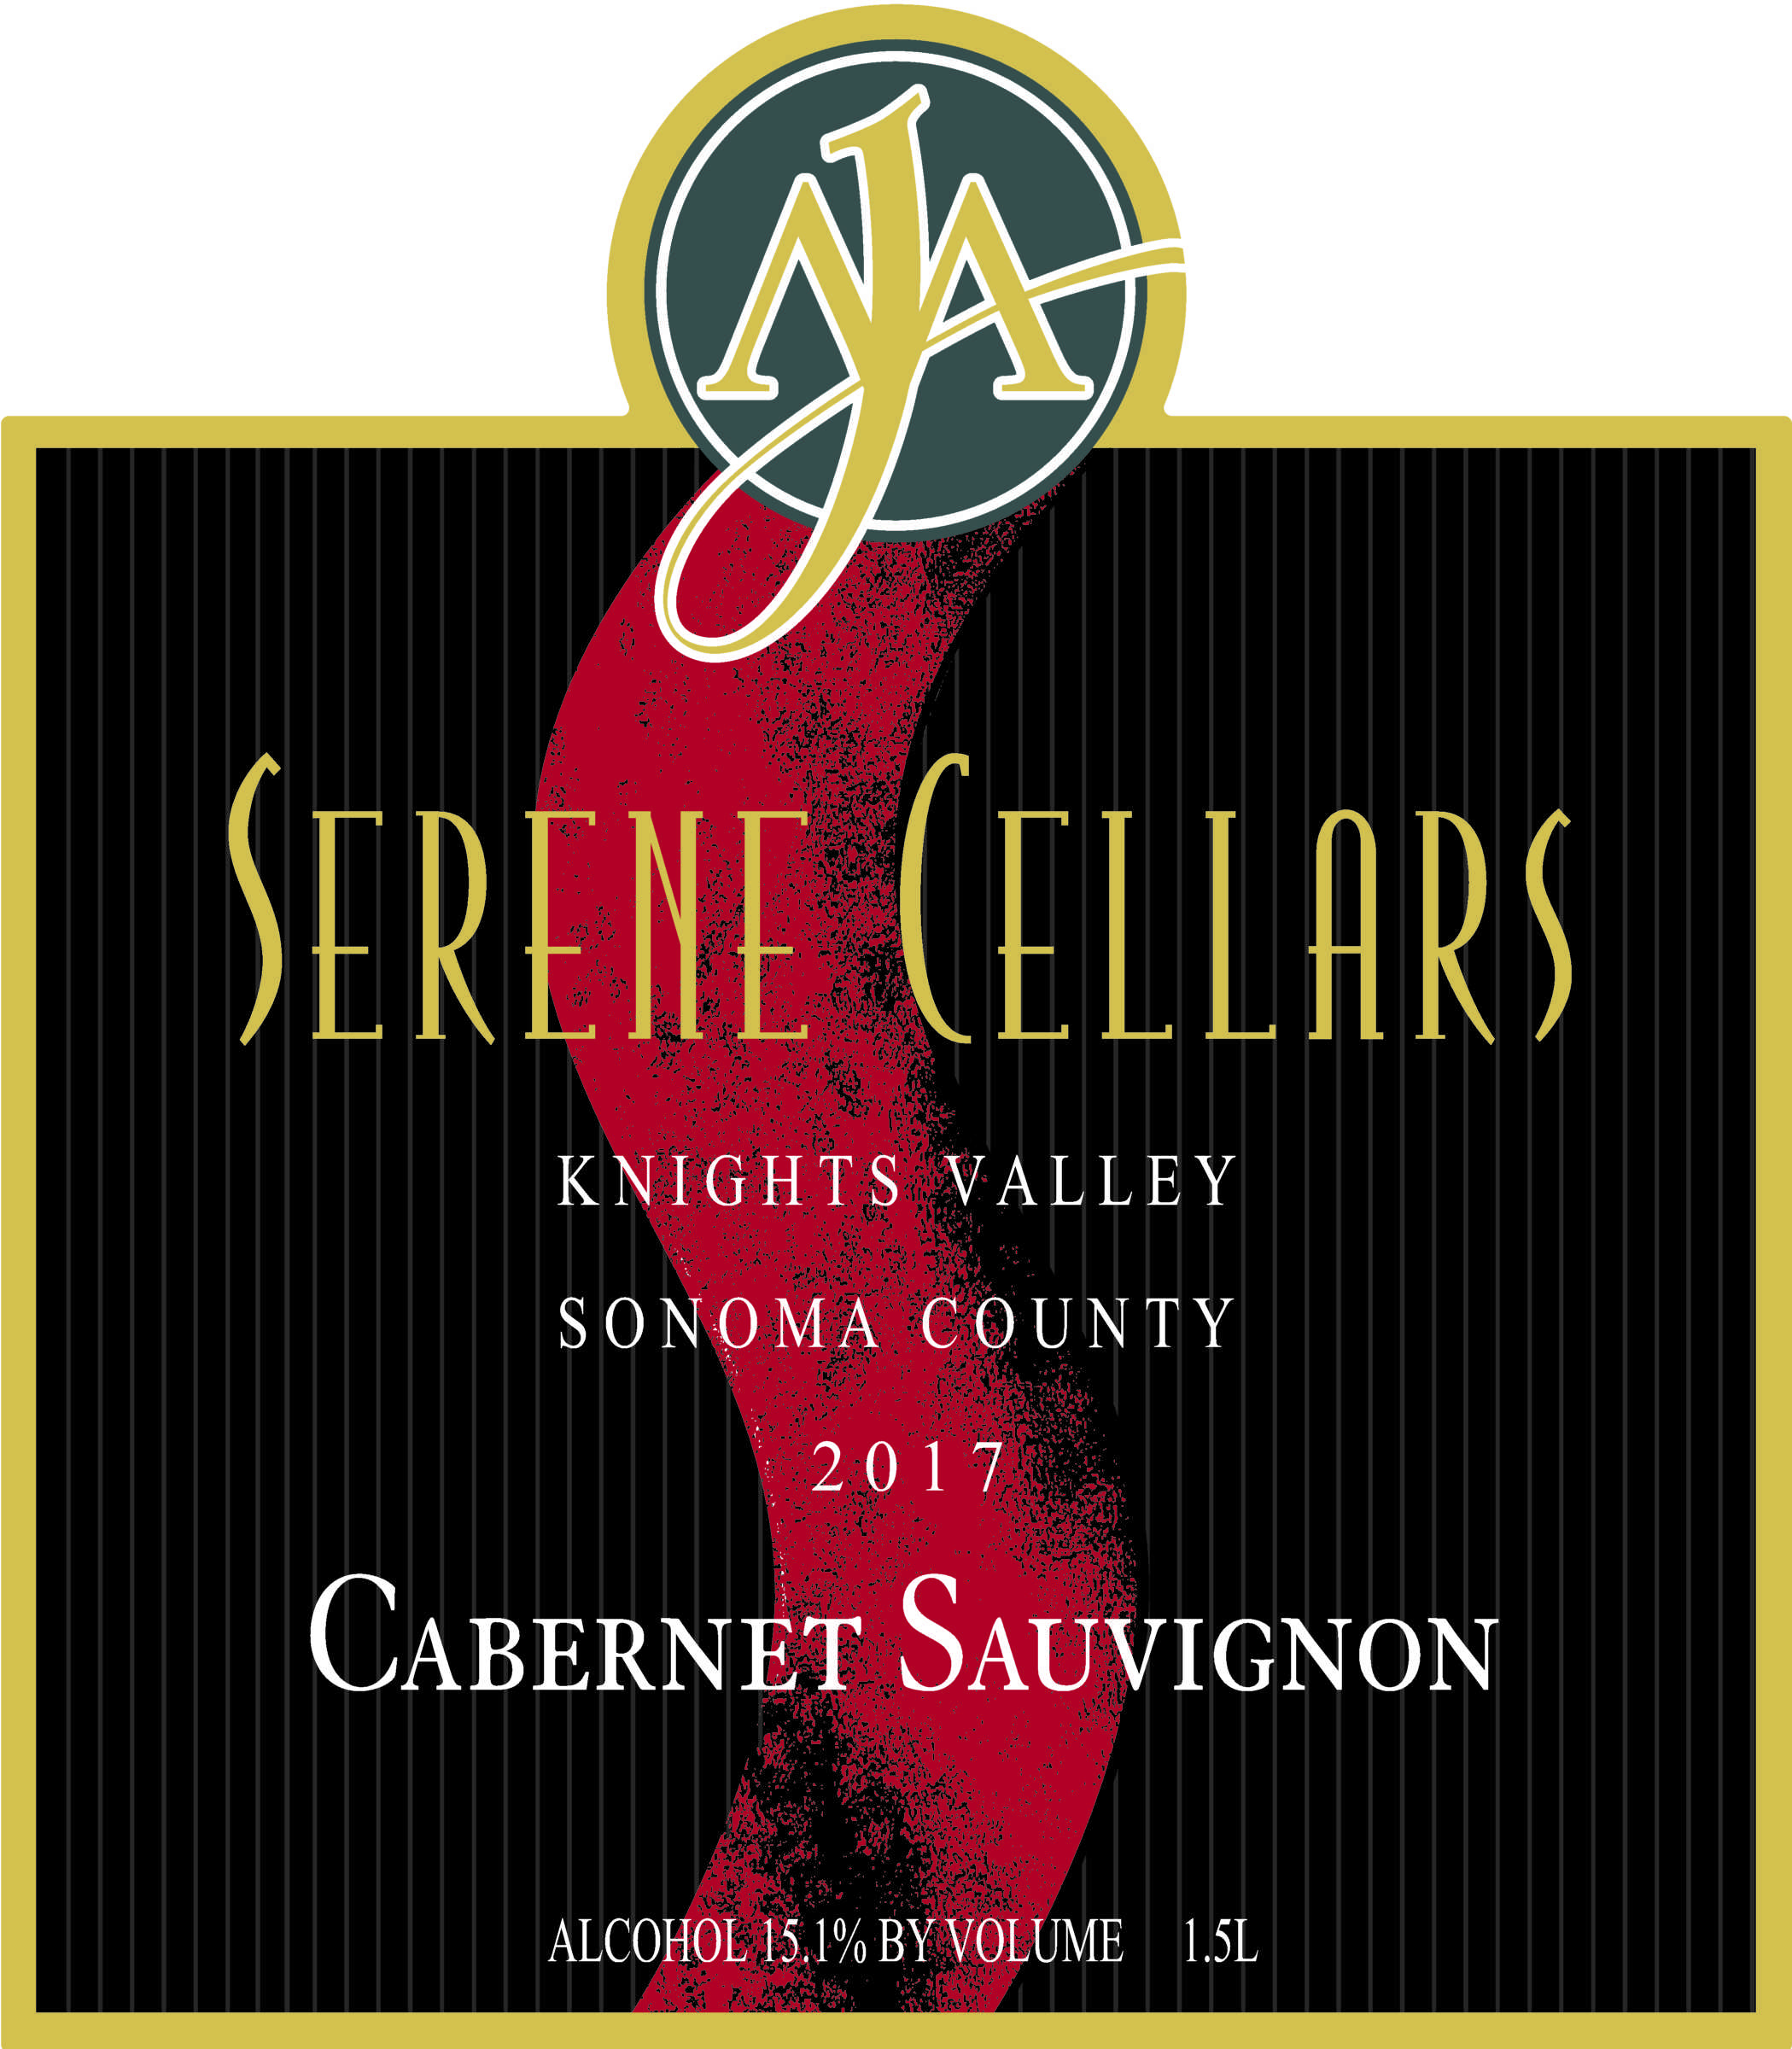 Product Image for 2017 Serene Cellars Knights Valley Cabernet Sauvignon "Intensity"